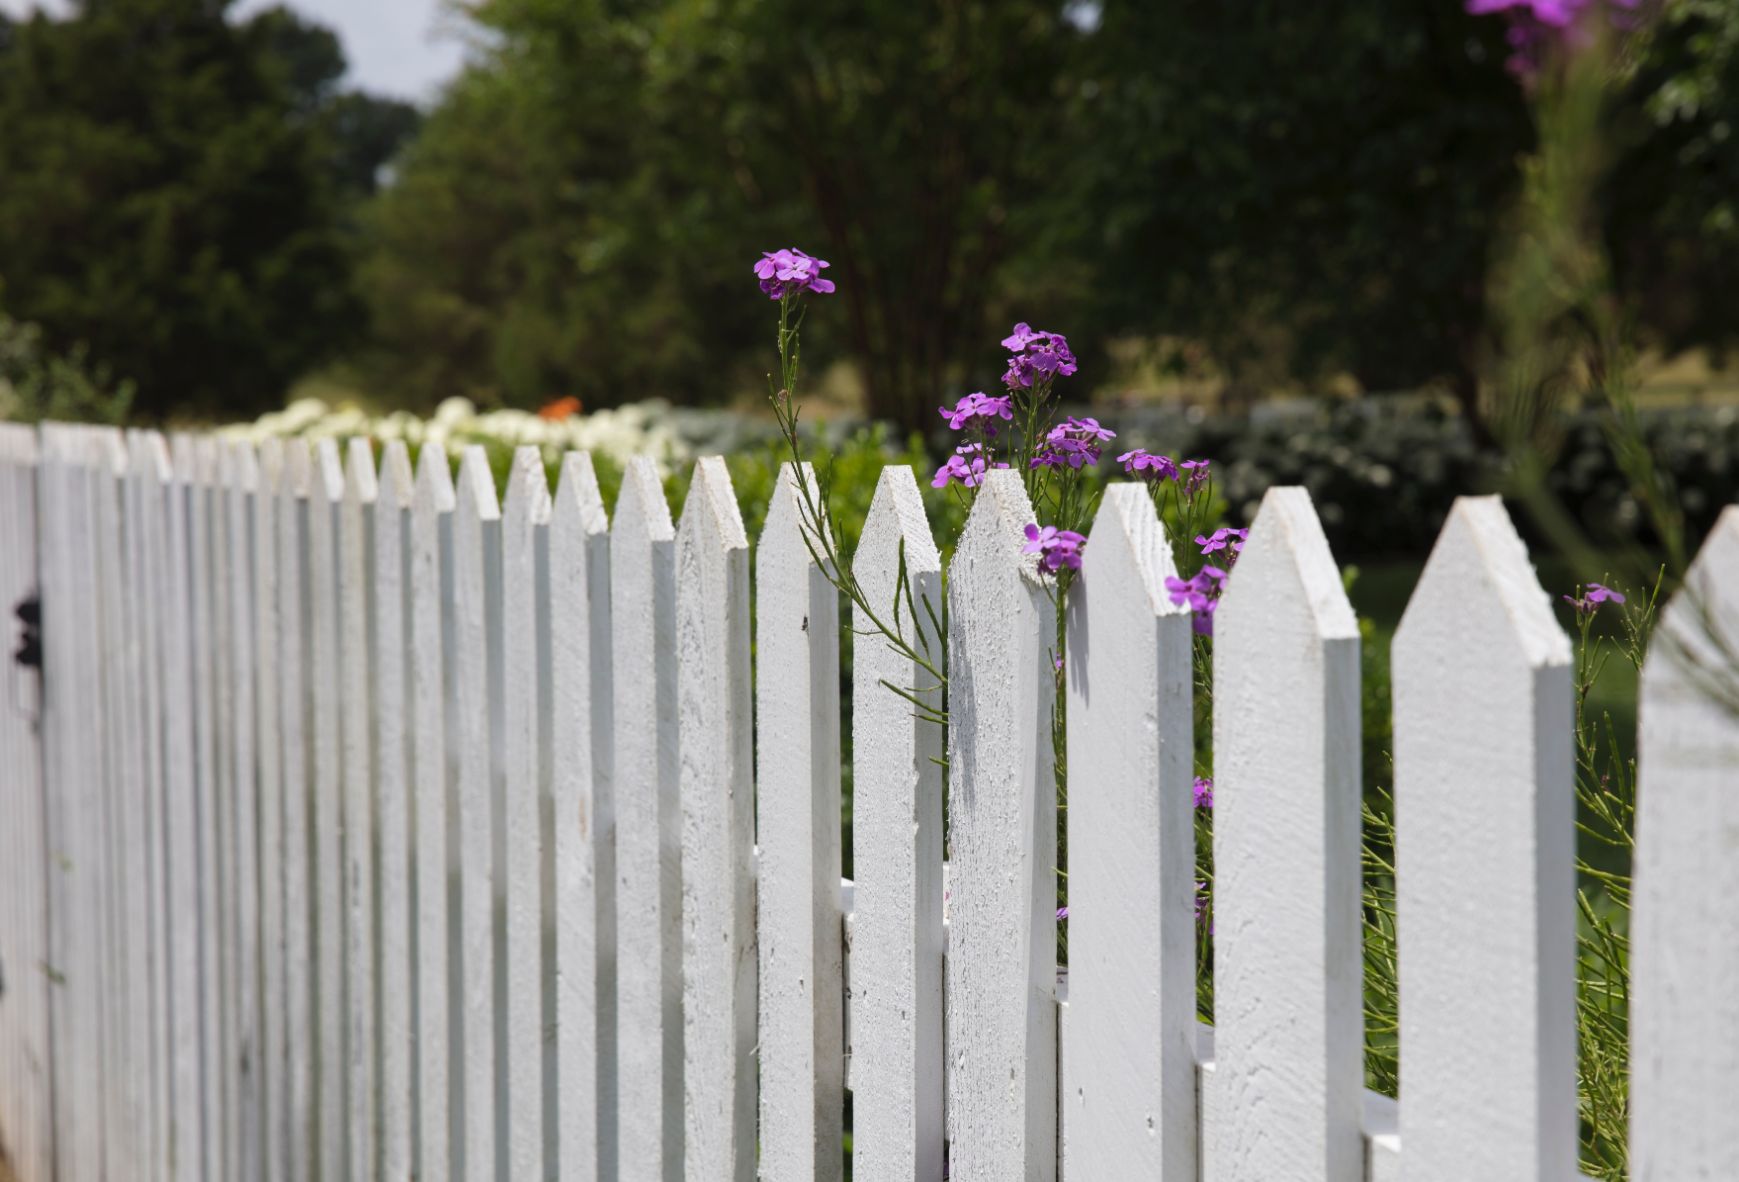 Trumbull Fence Contractor | Reliable Fence Installer Near Me​